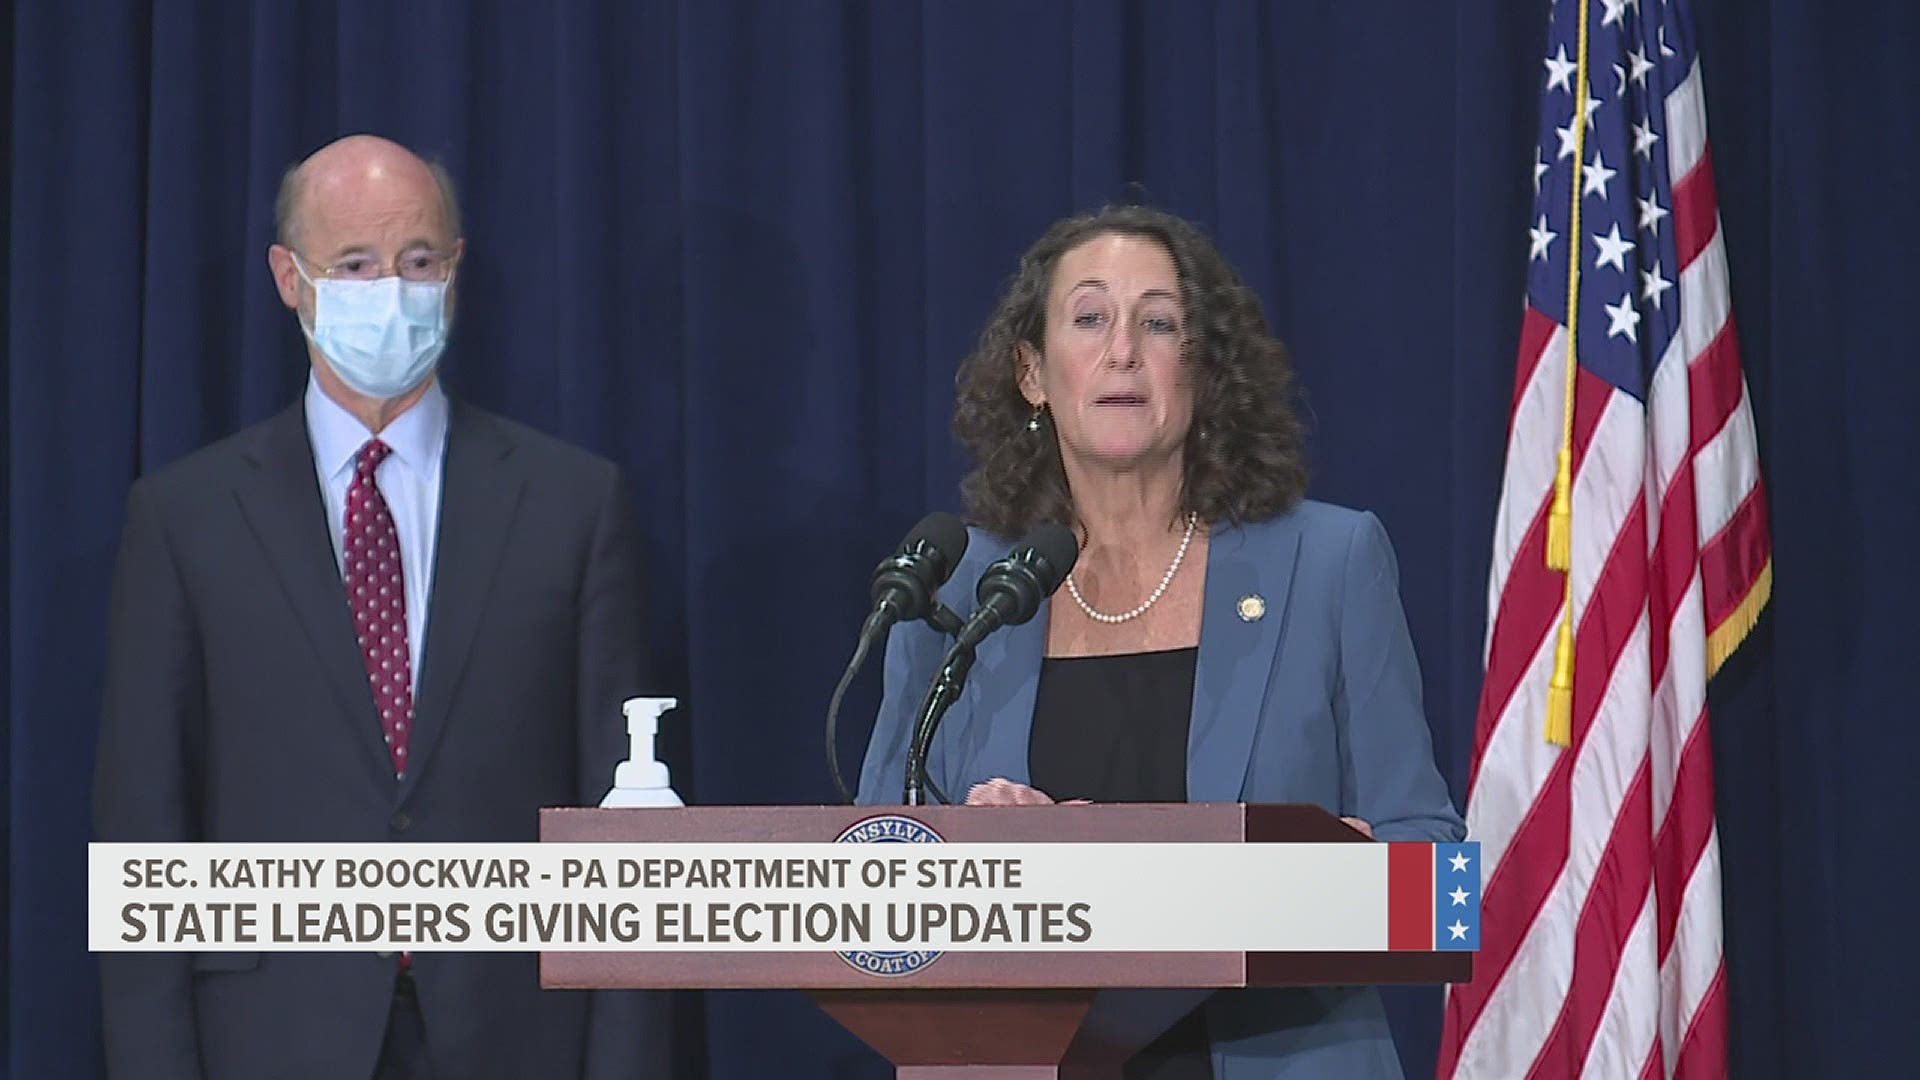 "Pennsylvania will have a fair election," the governor said Wednesday morning. "These votes will be counted accurately and they will be counted fully."